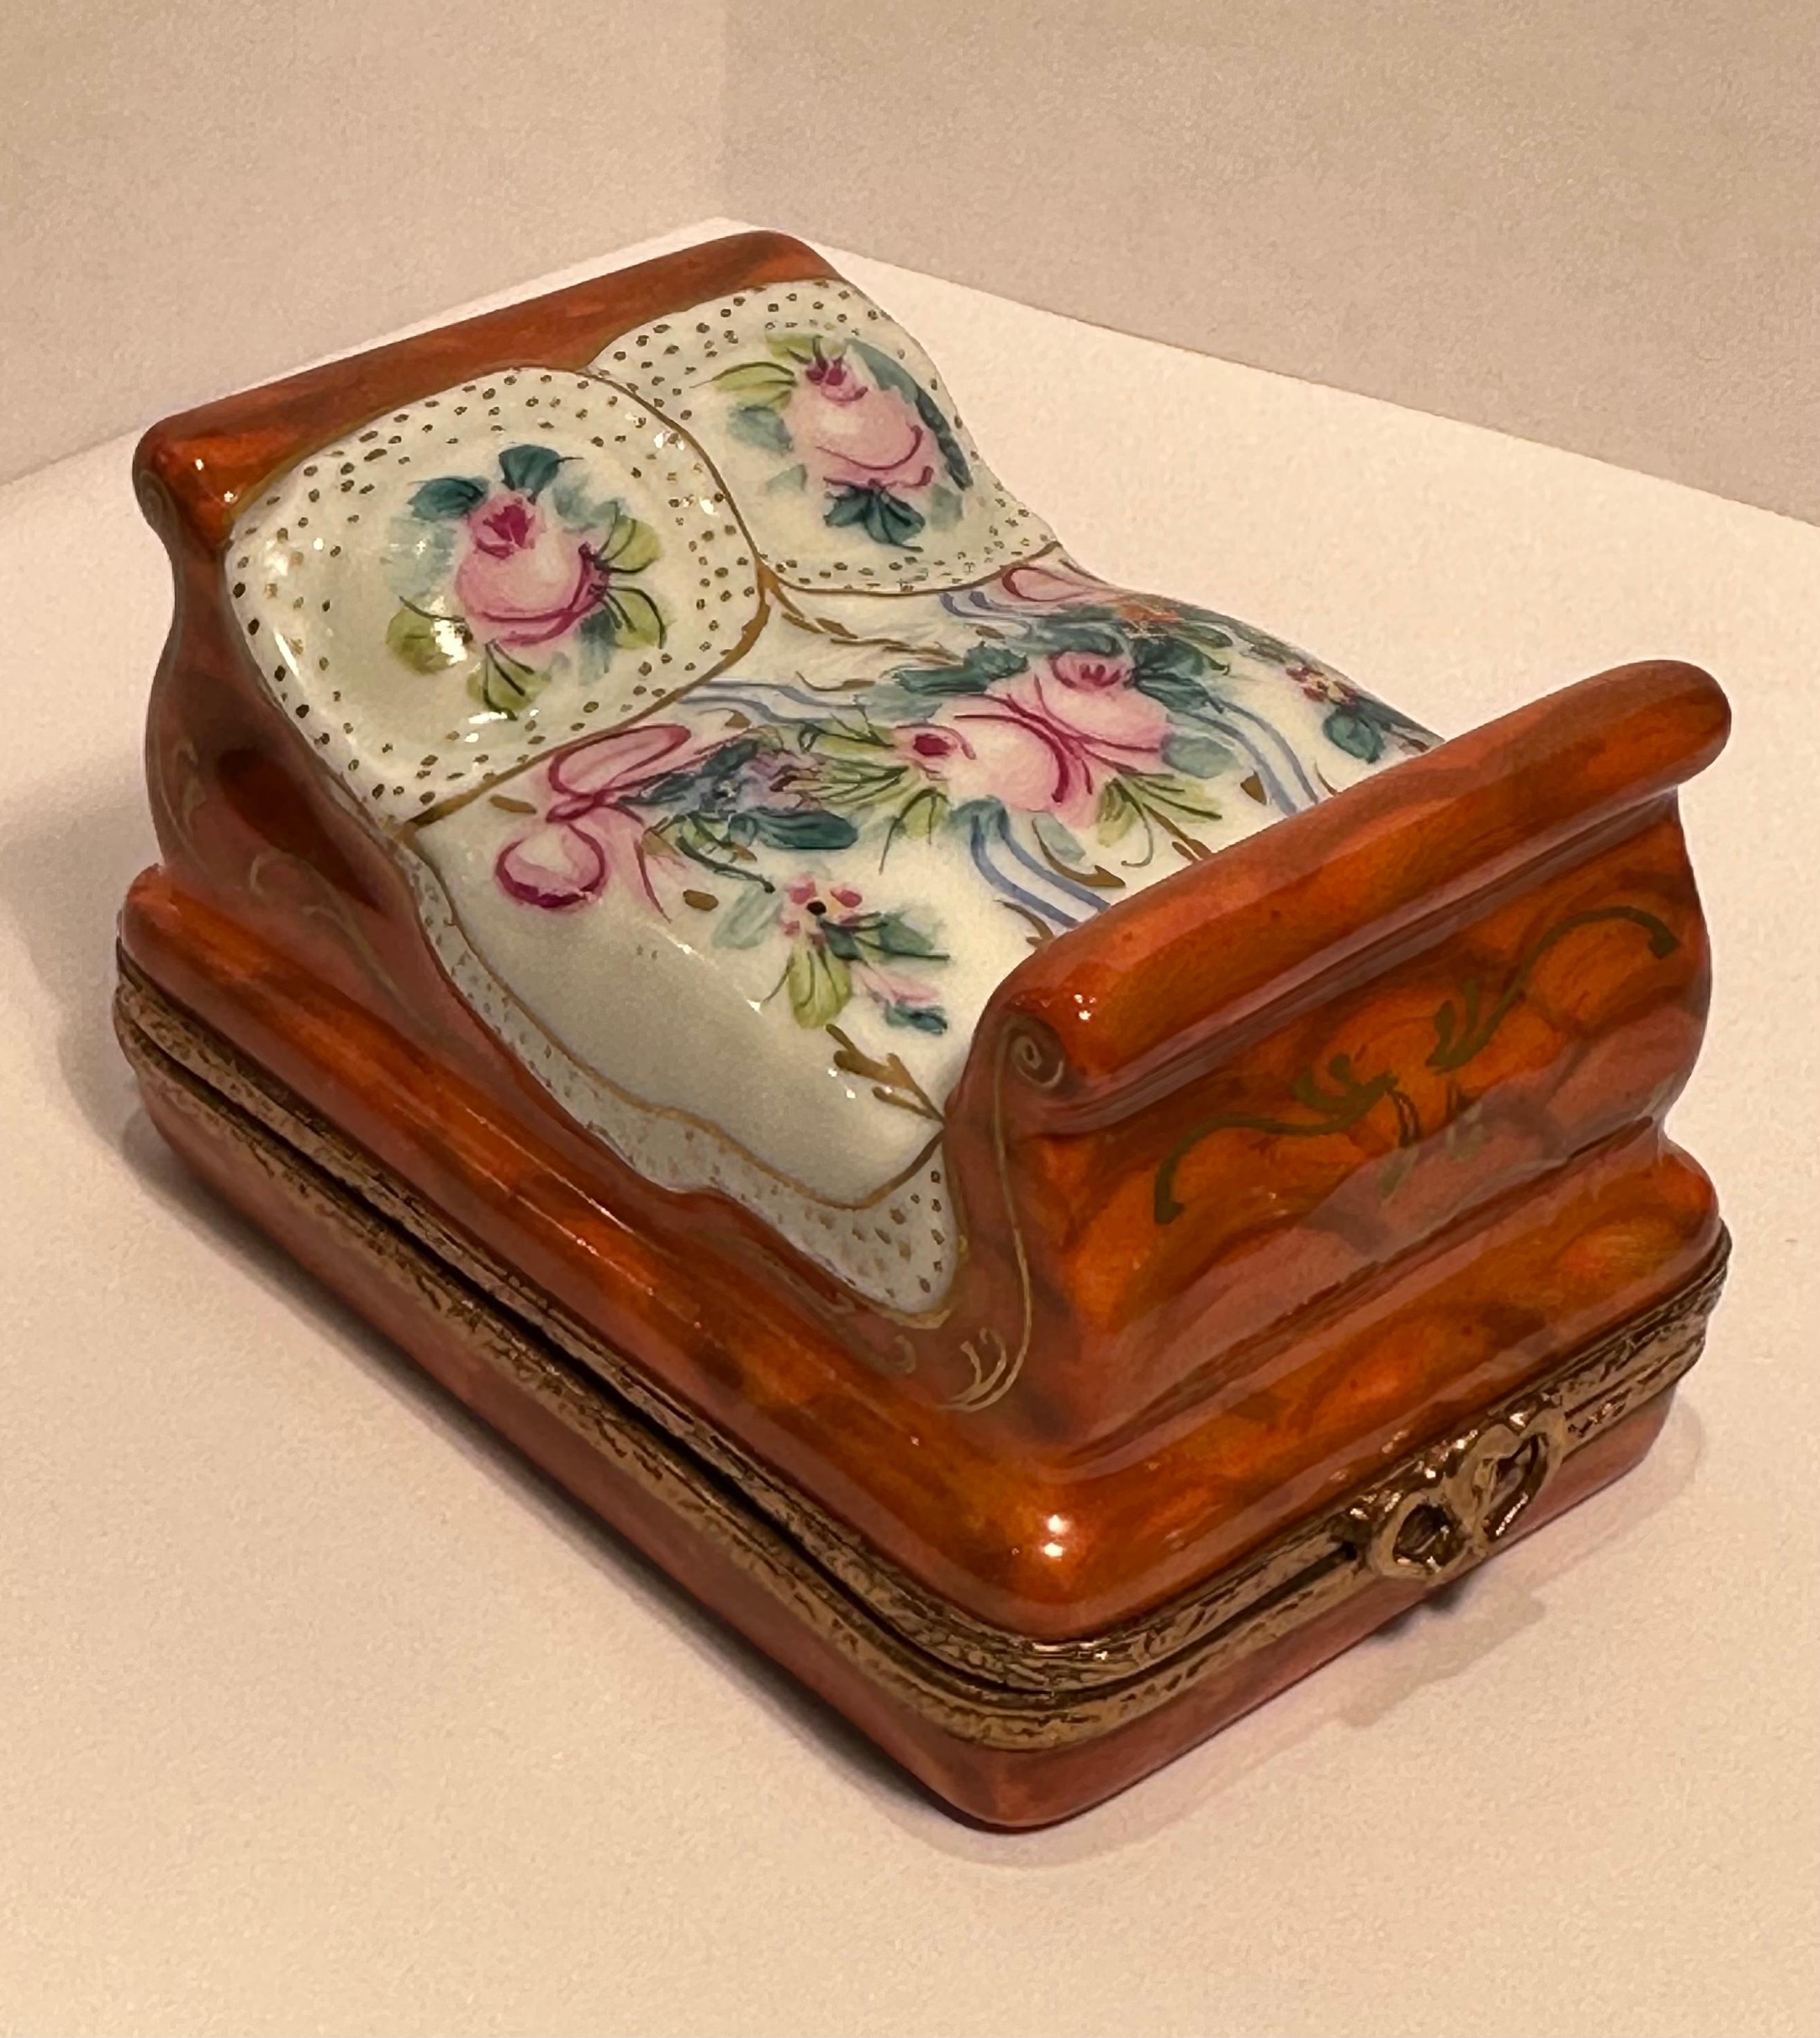 20th Century Limoges France Hand Painted French Sleigh Bed Porcelain Trinket Box